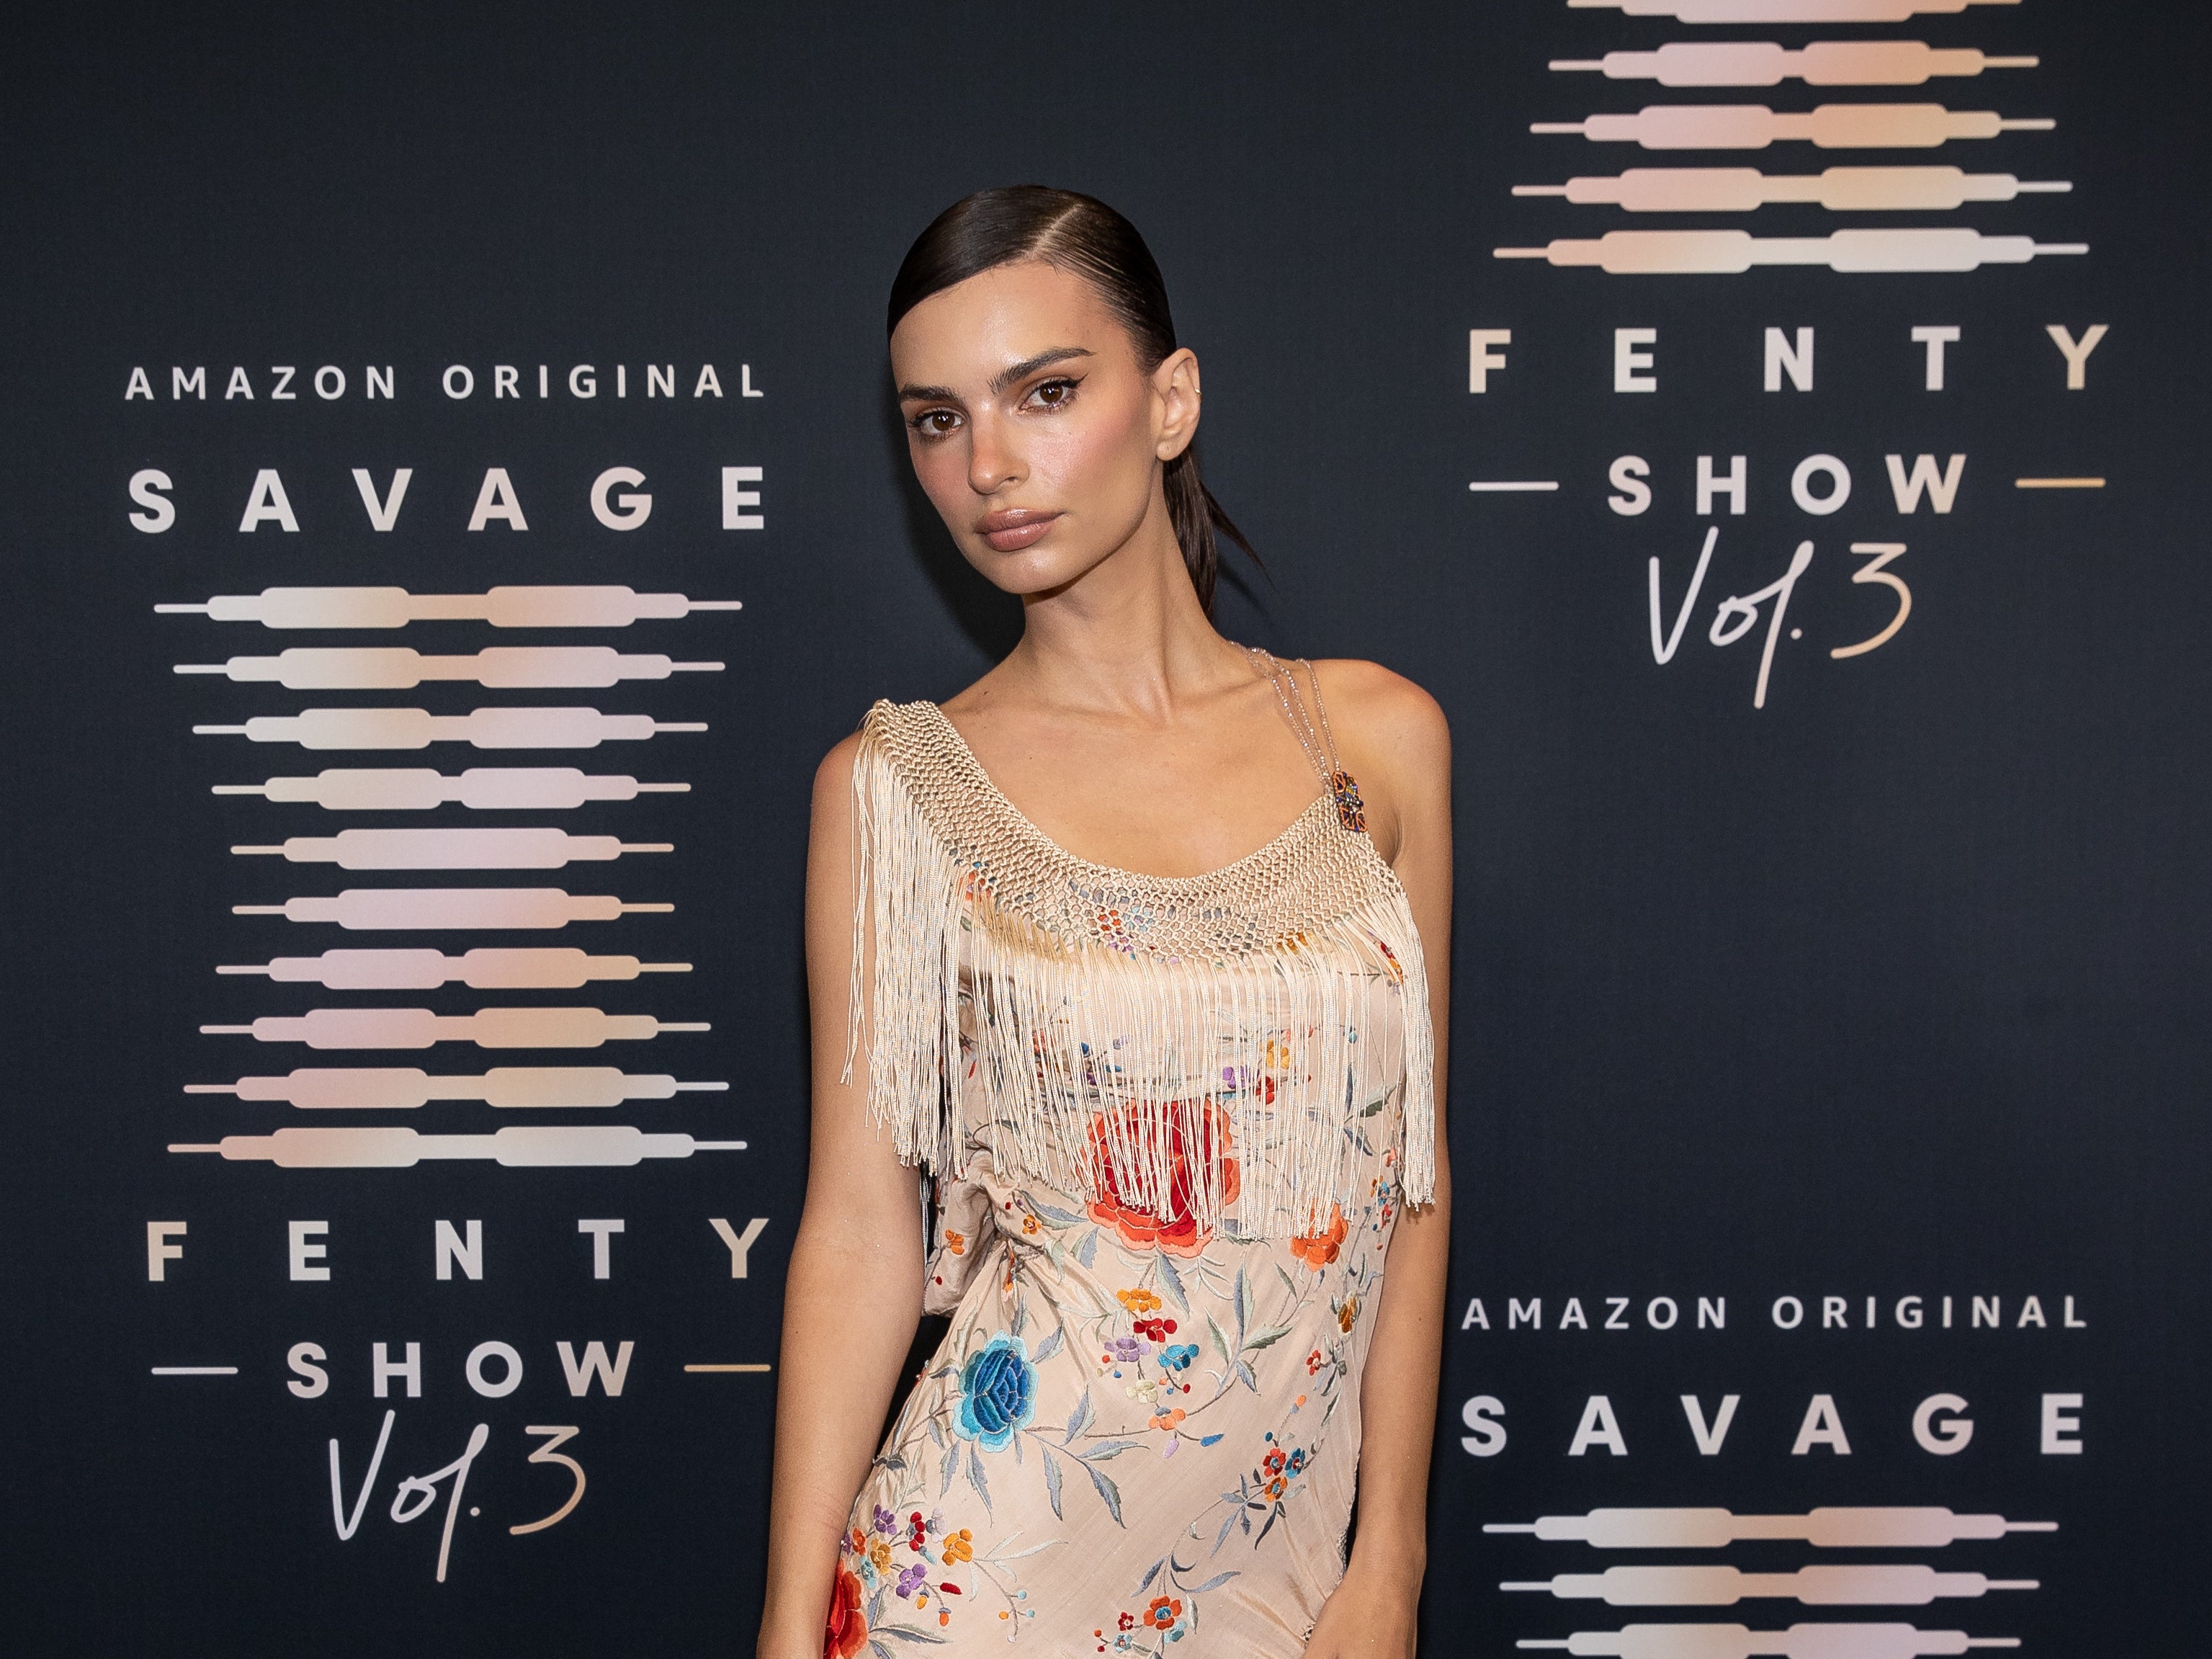 Emily Ratajkowski reveals why she didn’t come forward with assault allegations against Robin Thicke sooner